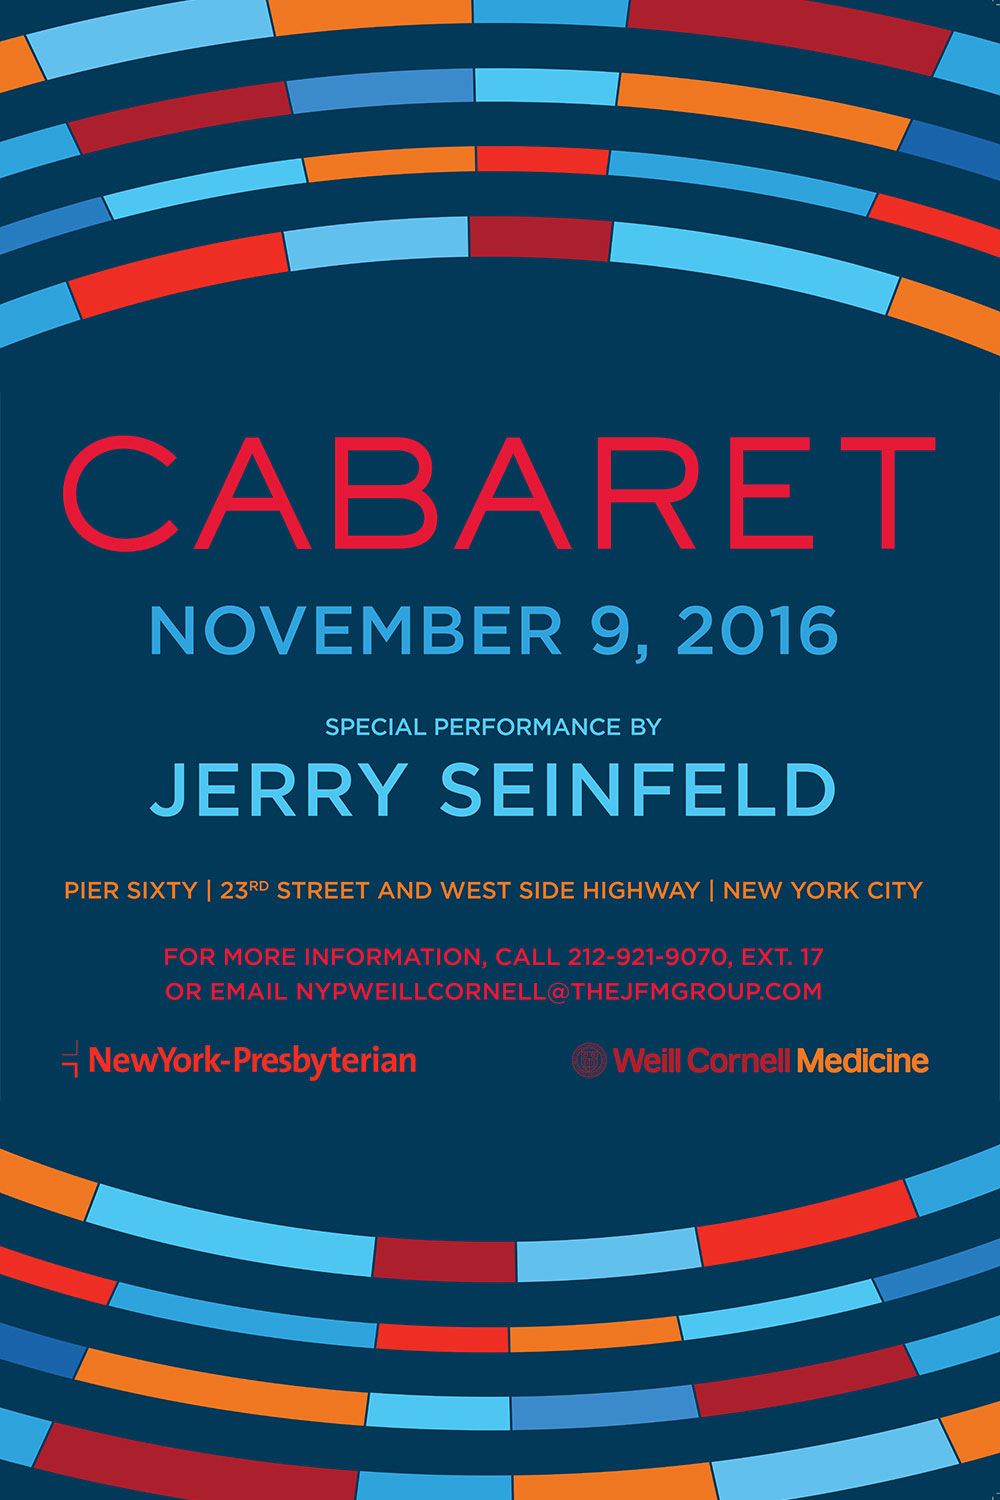 CLIENT:Weill Cornell Medicine 
New York Presbyterian Hospital

DATE:November 2016

PROJECT:Poster for annual Cabaret gala